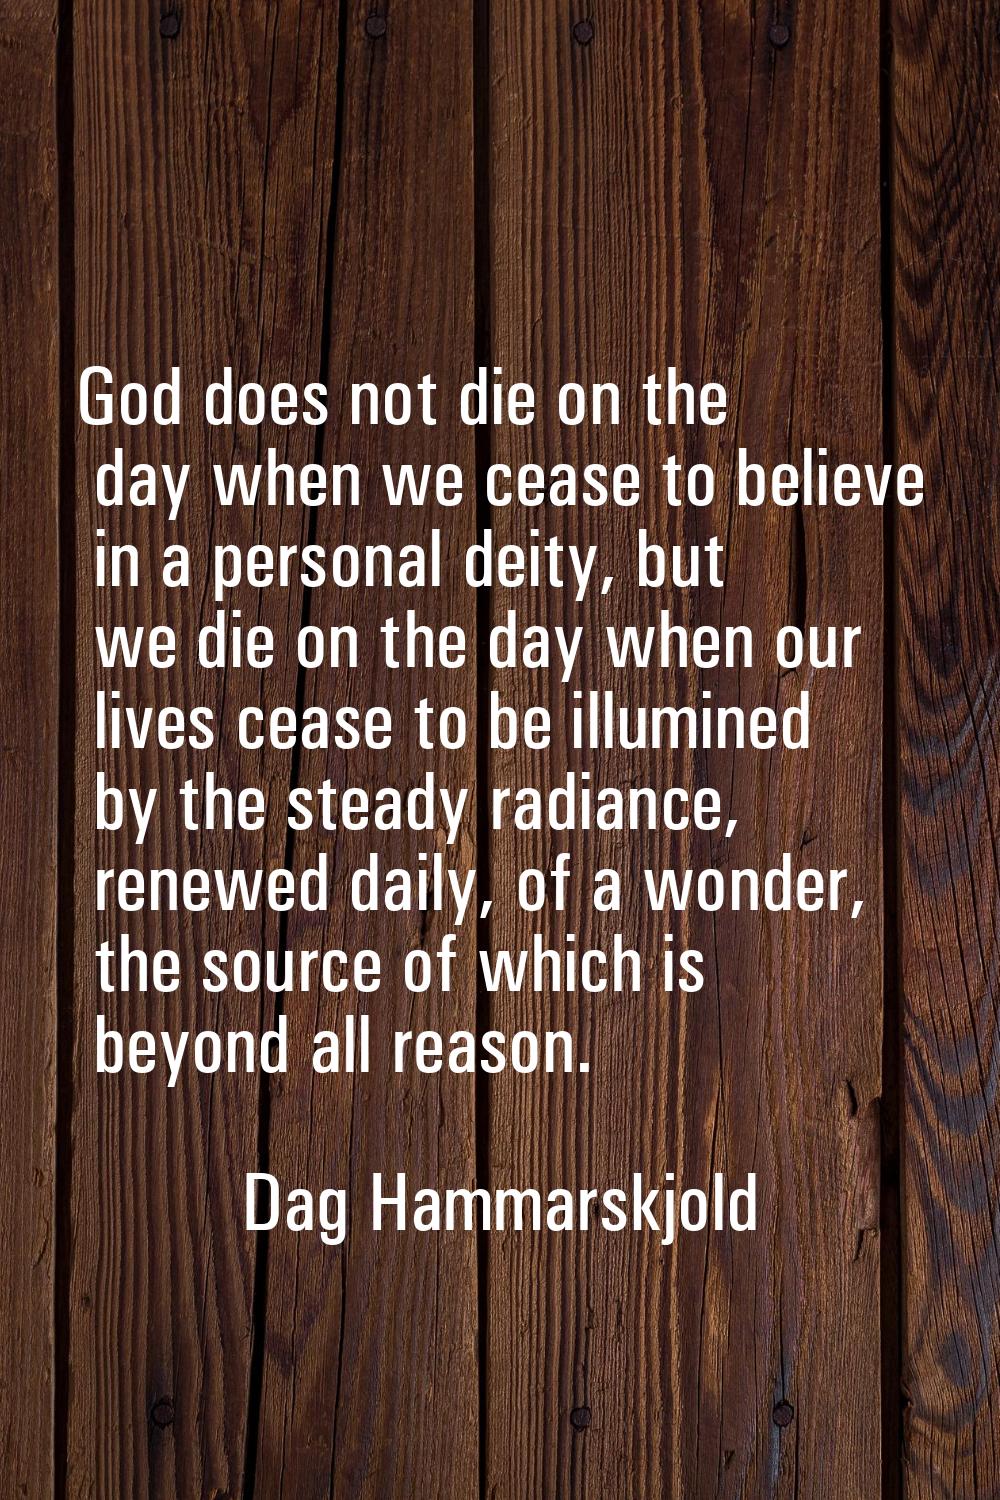 God does not die on the day when we cease to believe in a personal deity, but we die on the day whe